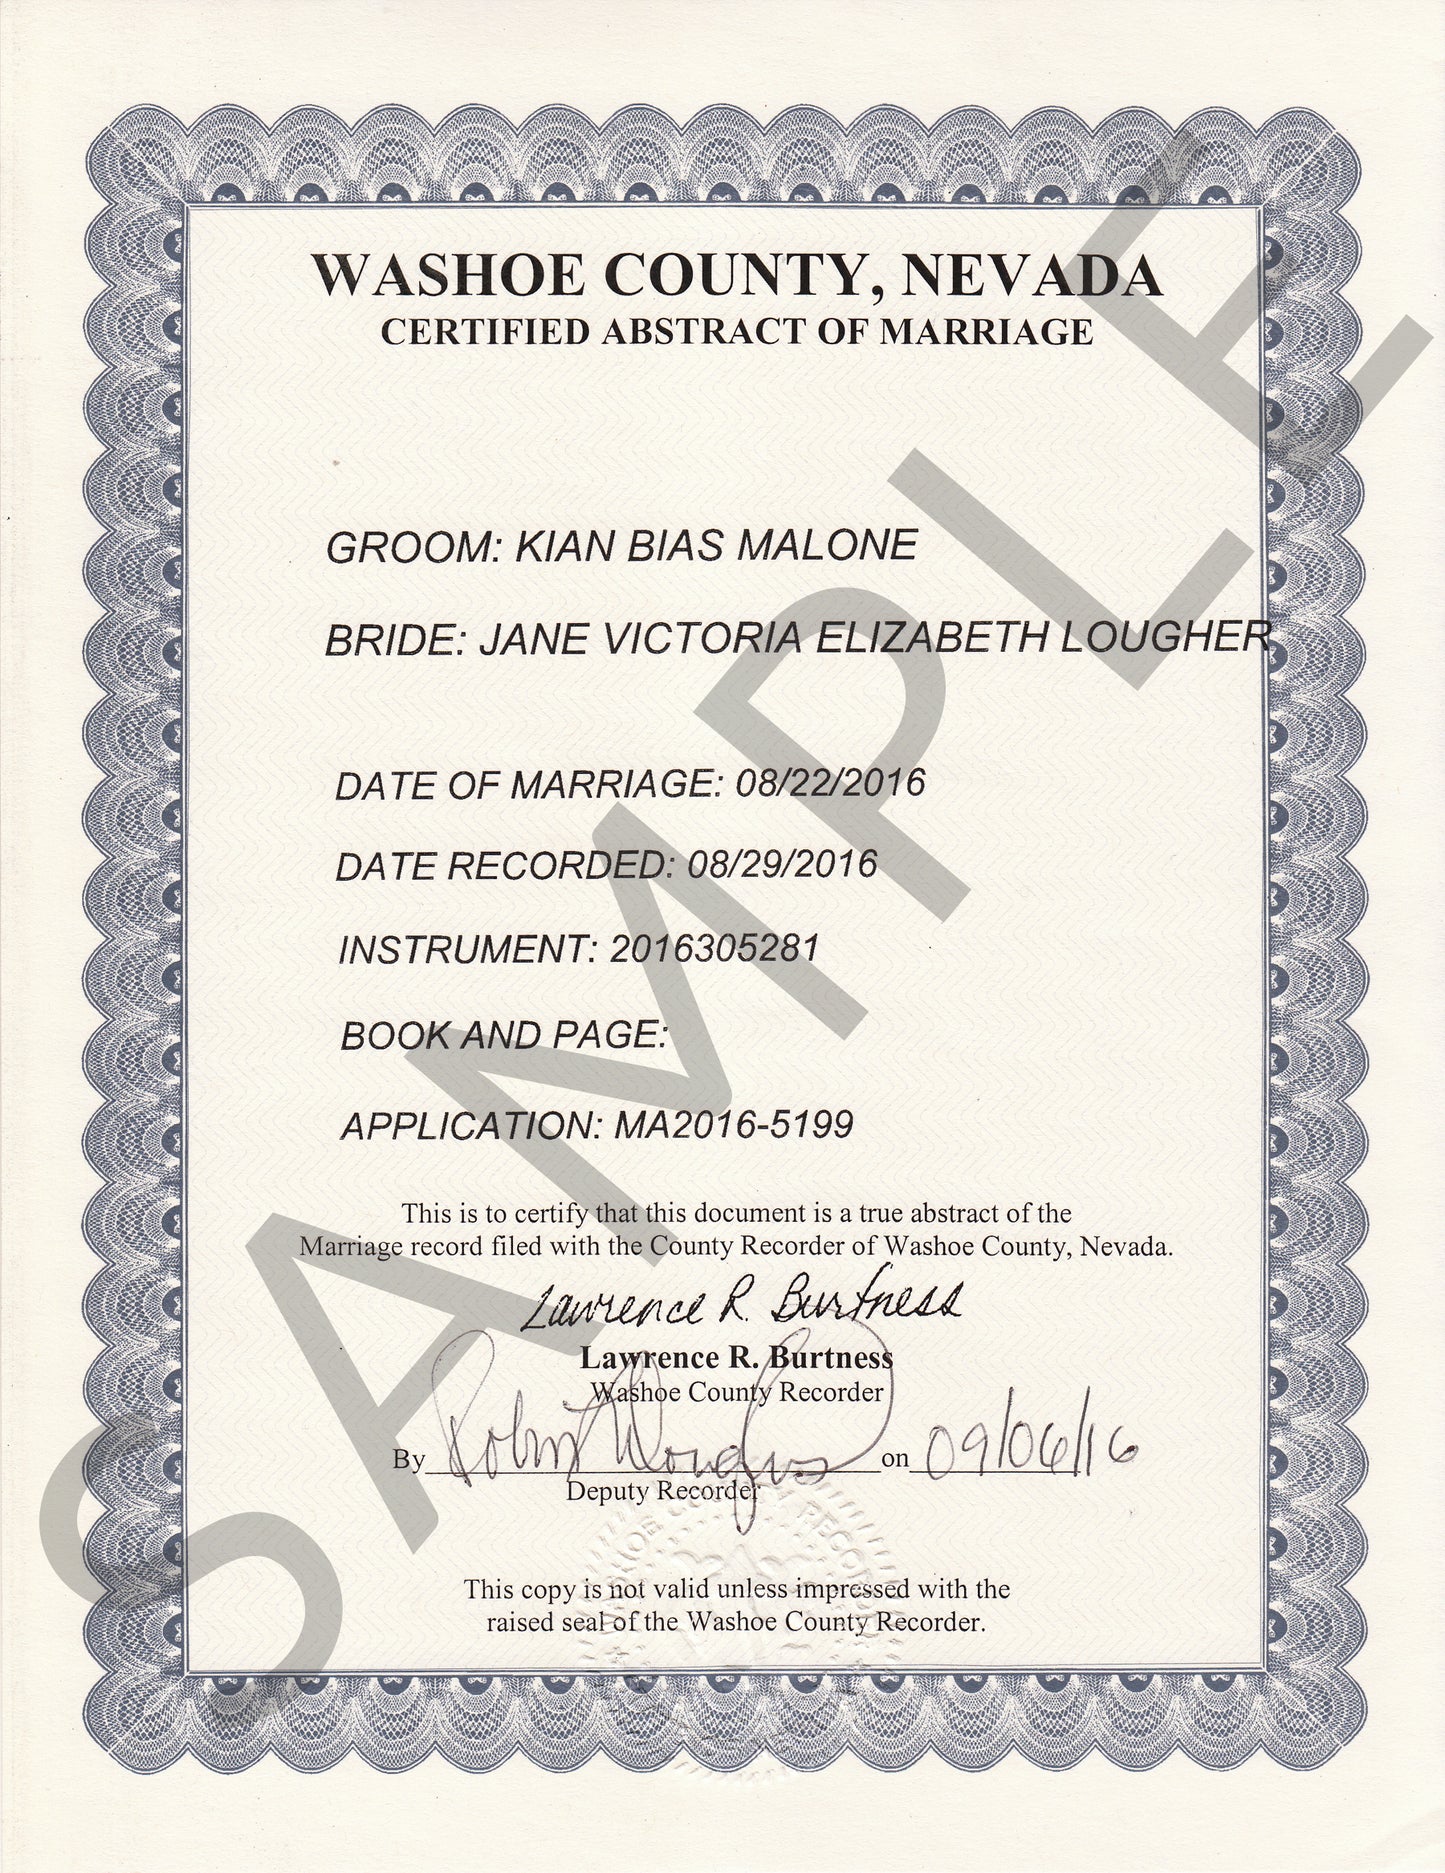 Marriage Registry Extract (USA) Certified Abstract of a Certificate of Marriage